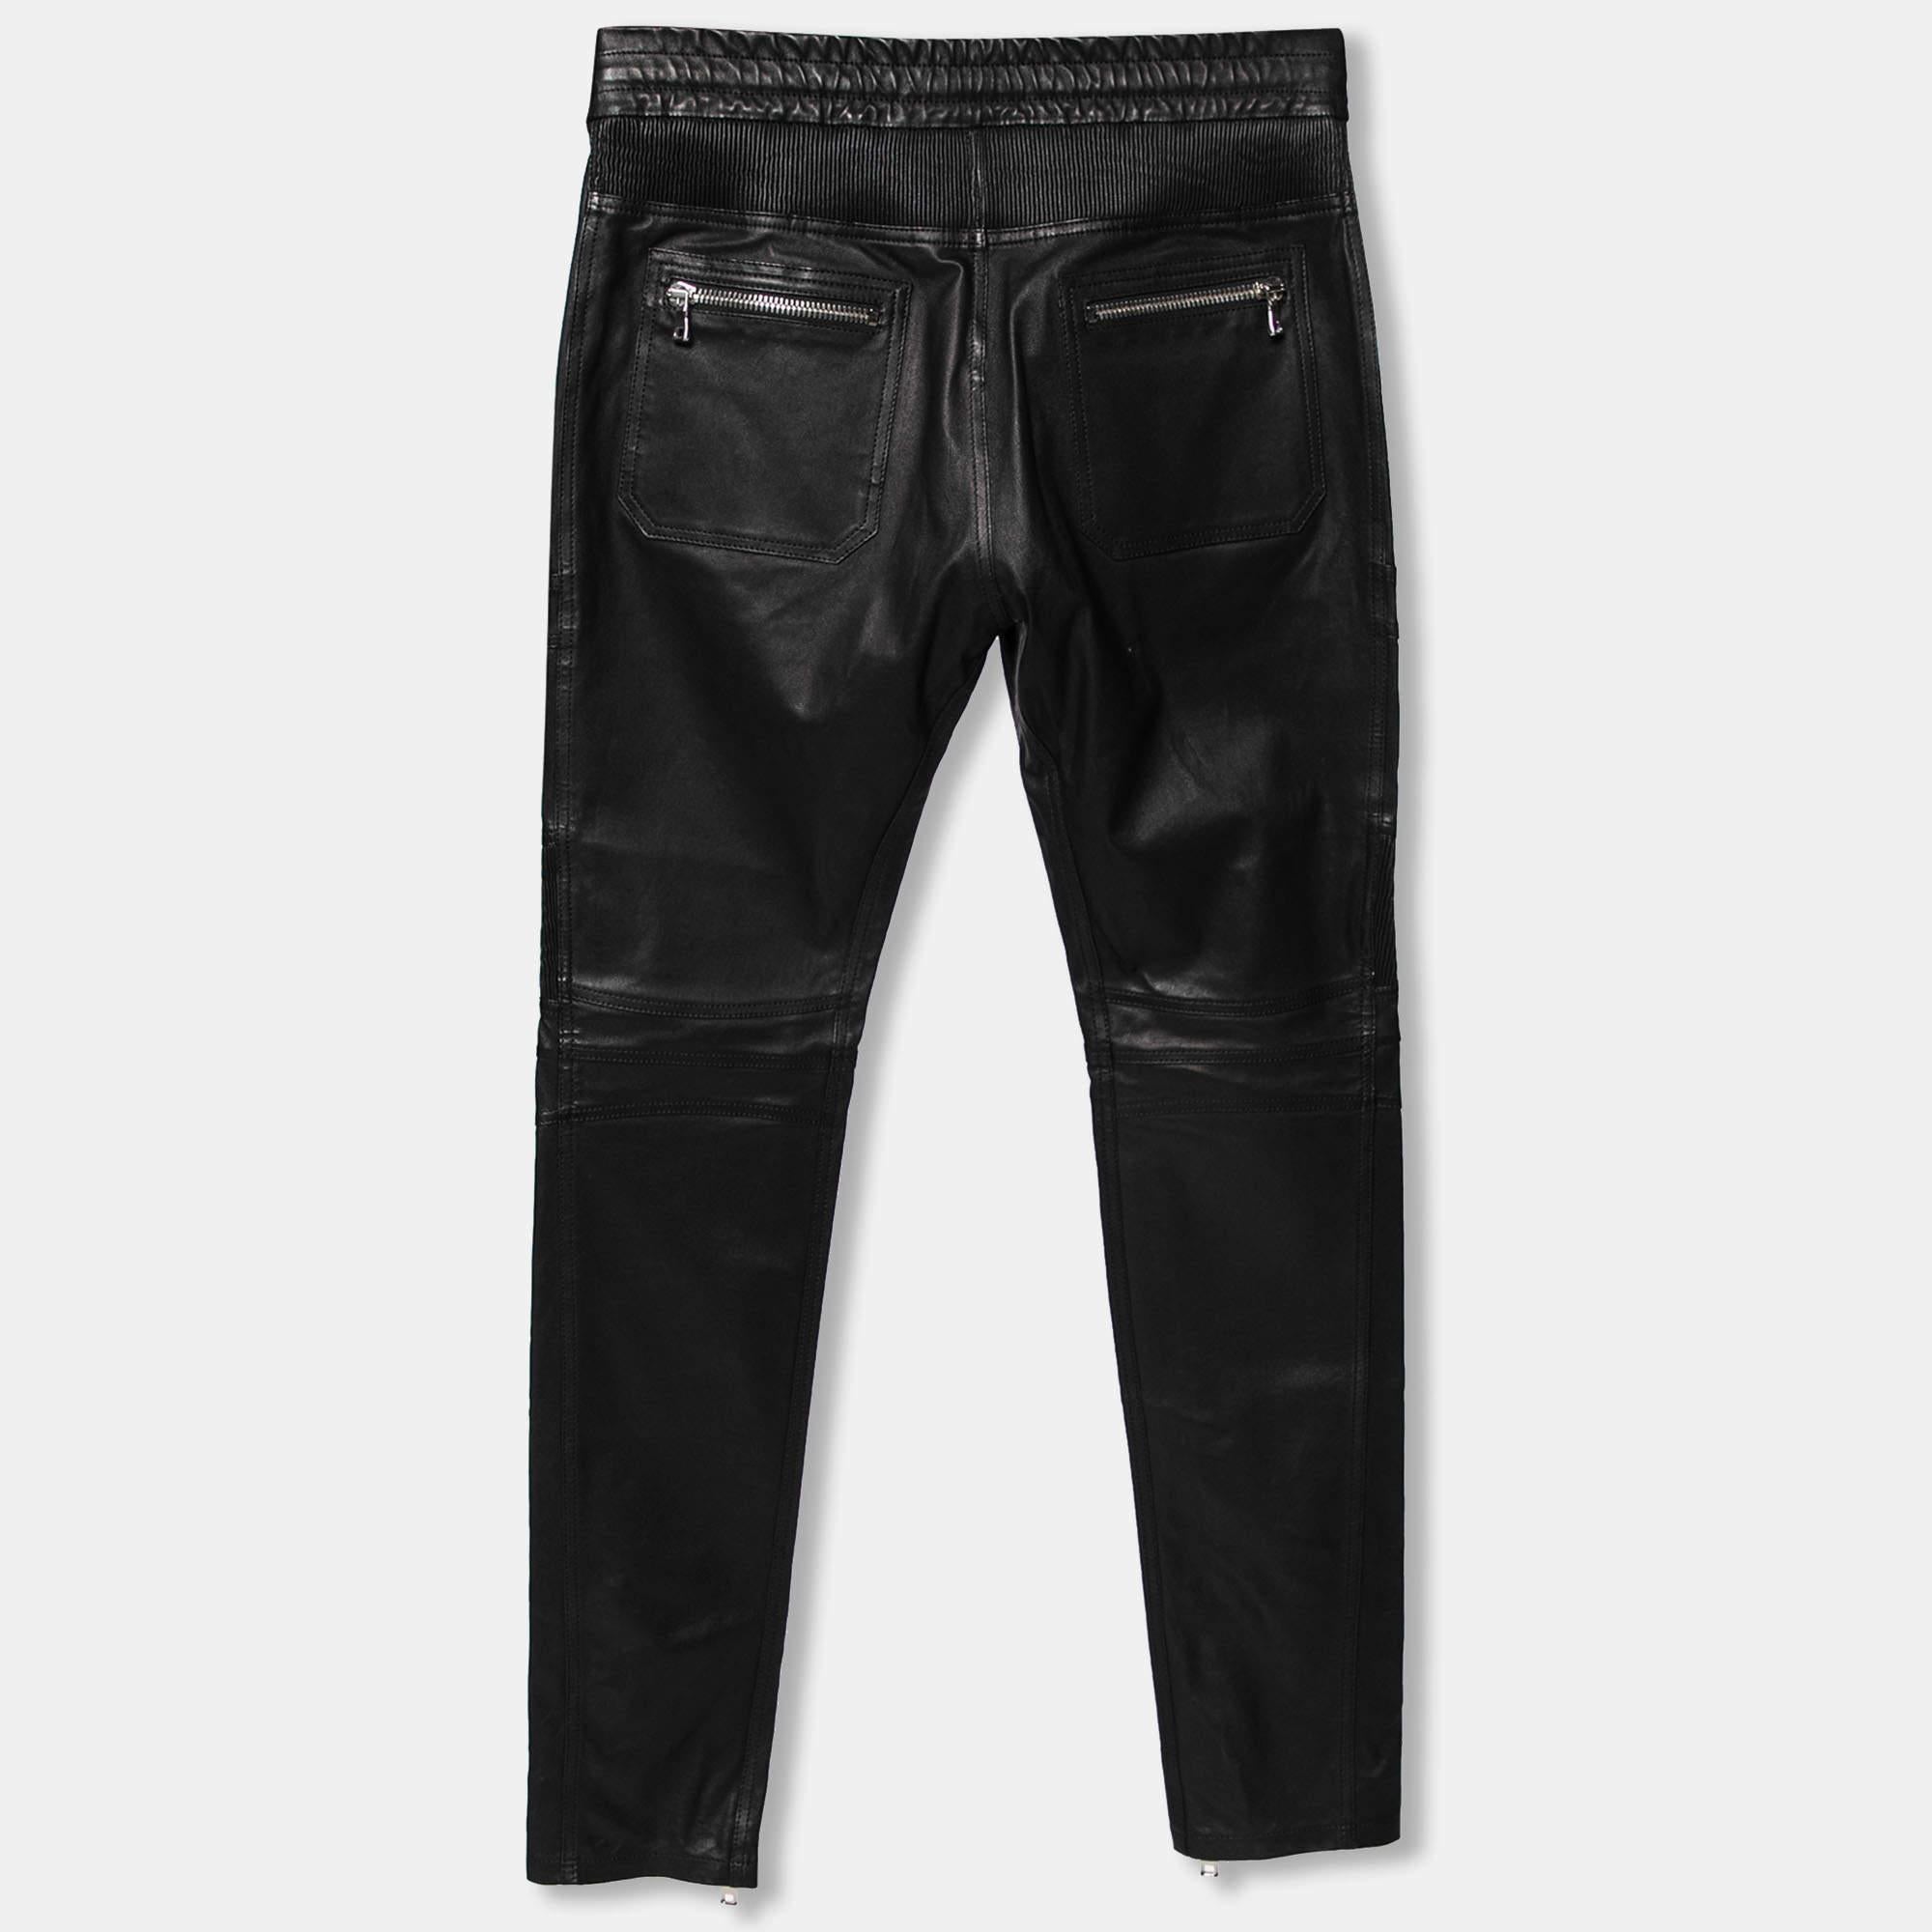 These Biker pants from Balmain will add a luxe edge to your attire. They are created using black leather into a fitted silhouette. They show zipper details. They are equipped with a drawstring closure and an elasticized waist. Add them to your